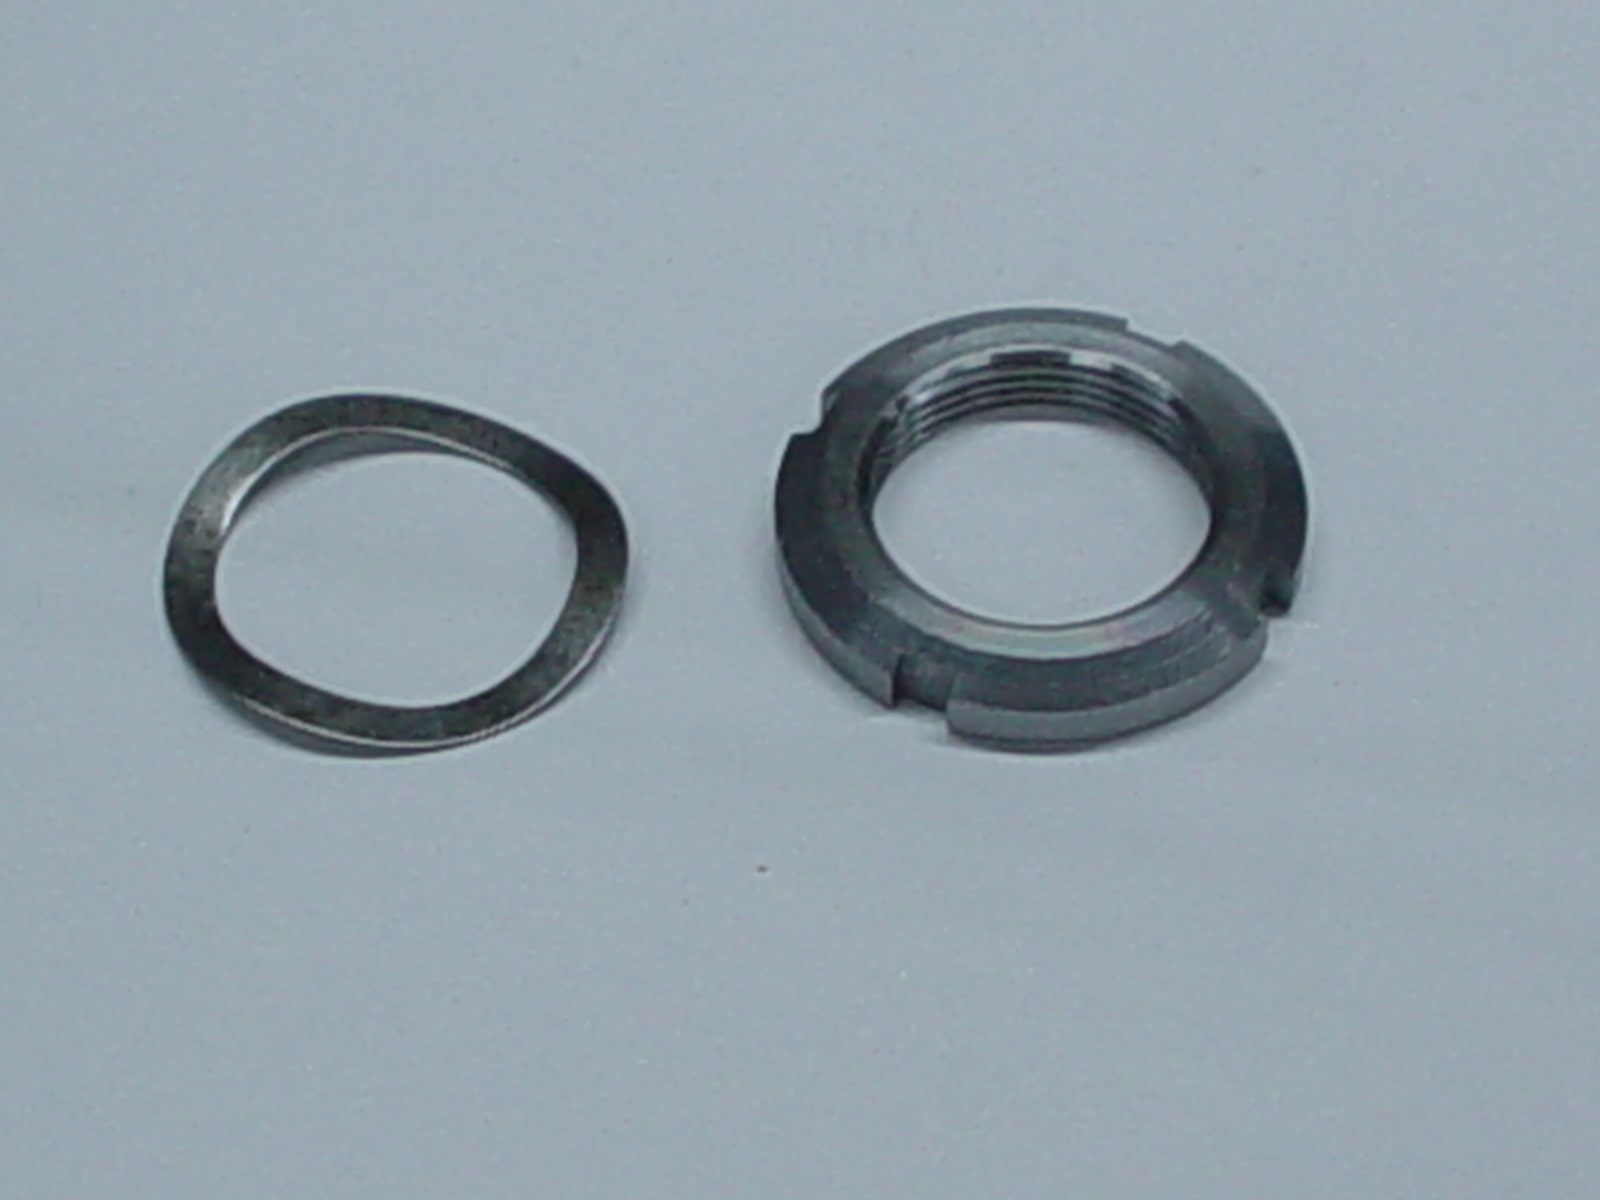 Unwind Tension Assembly Nut and Washer